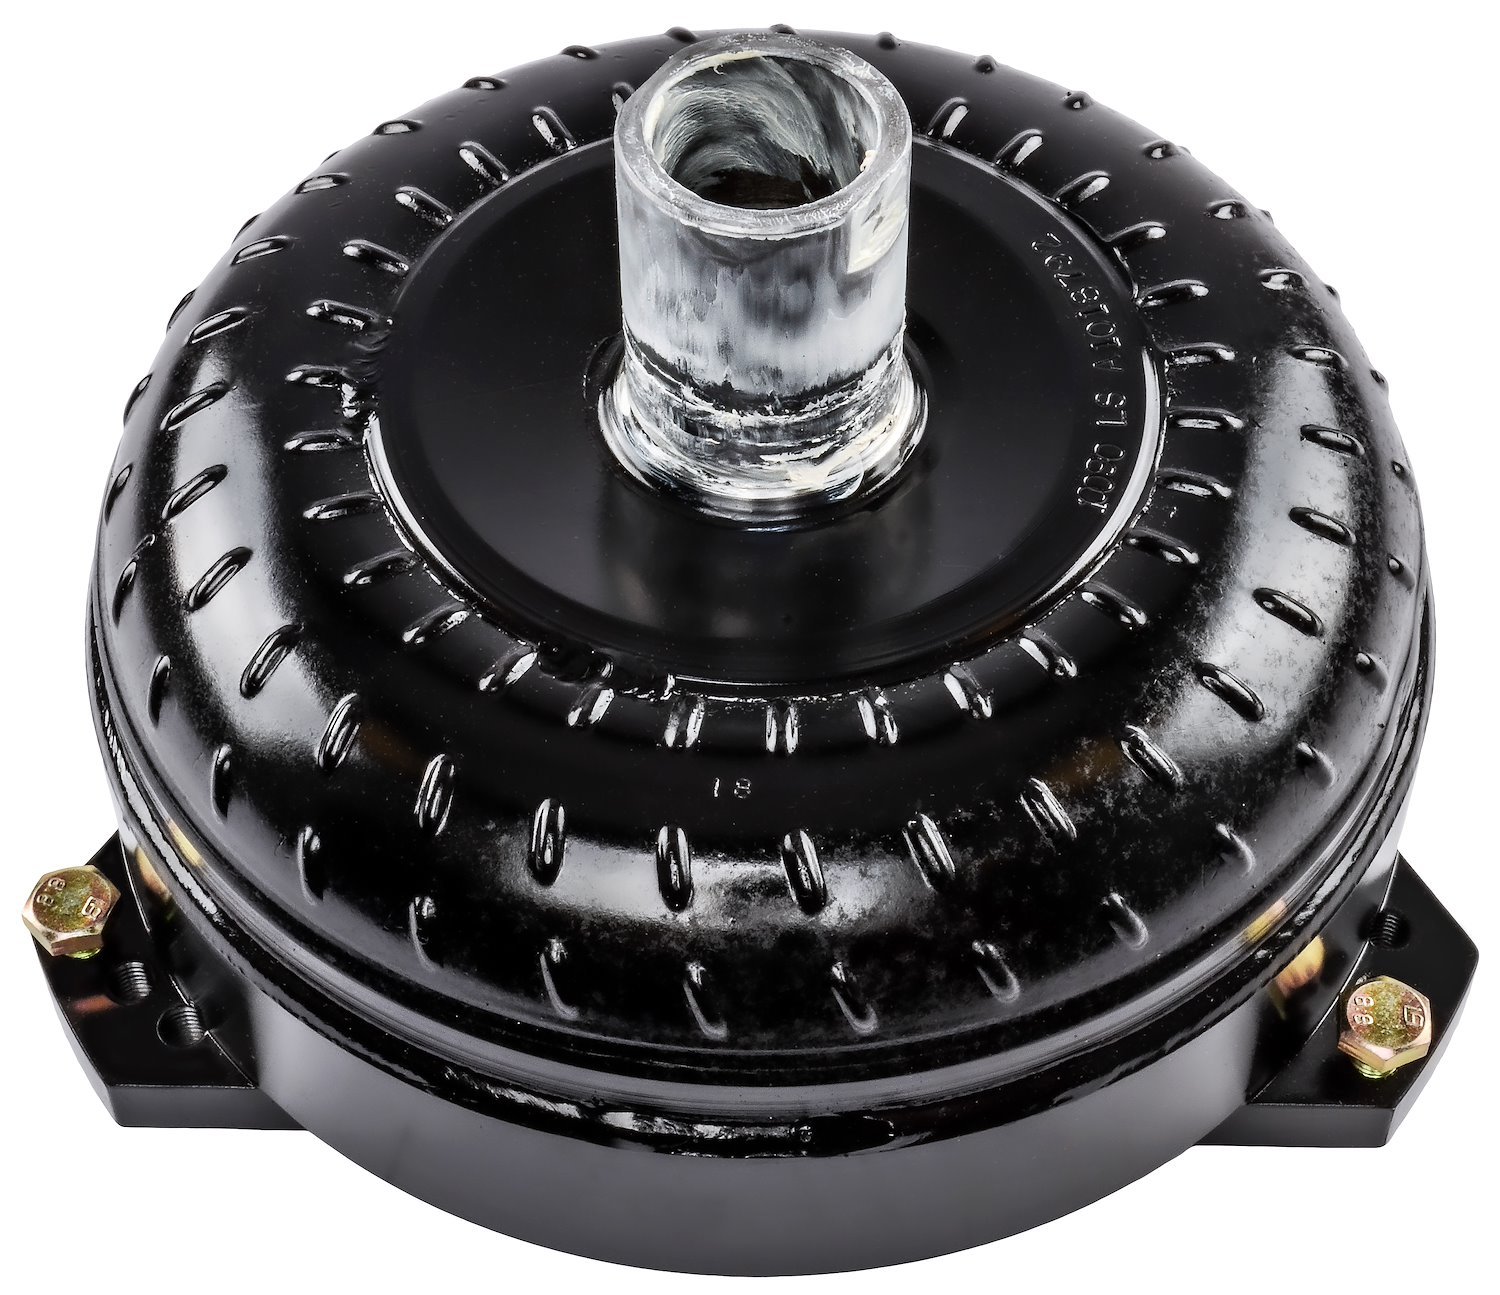 Billet Torque Converter for GM 4L80E/4L85E Mounted to